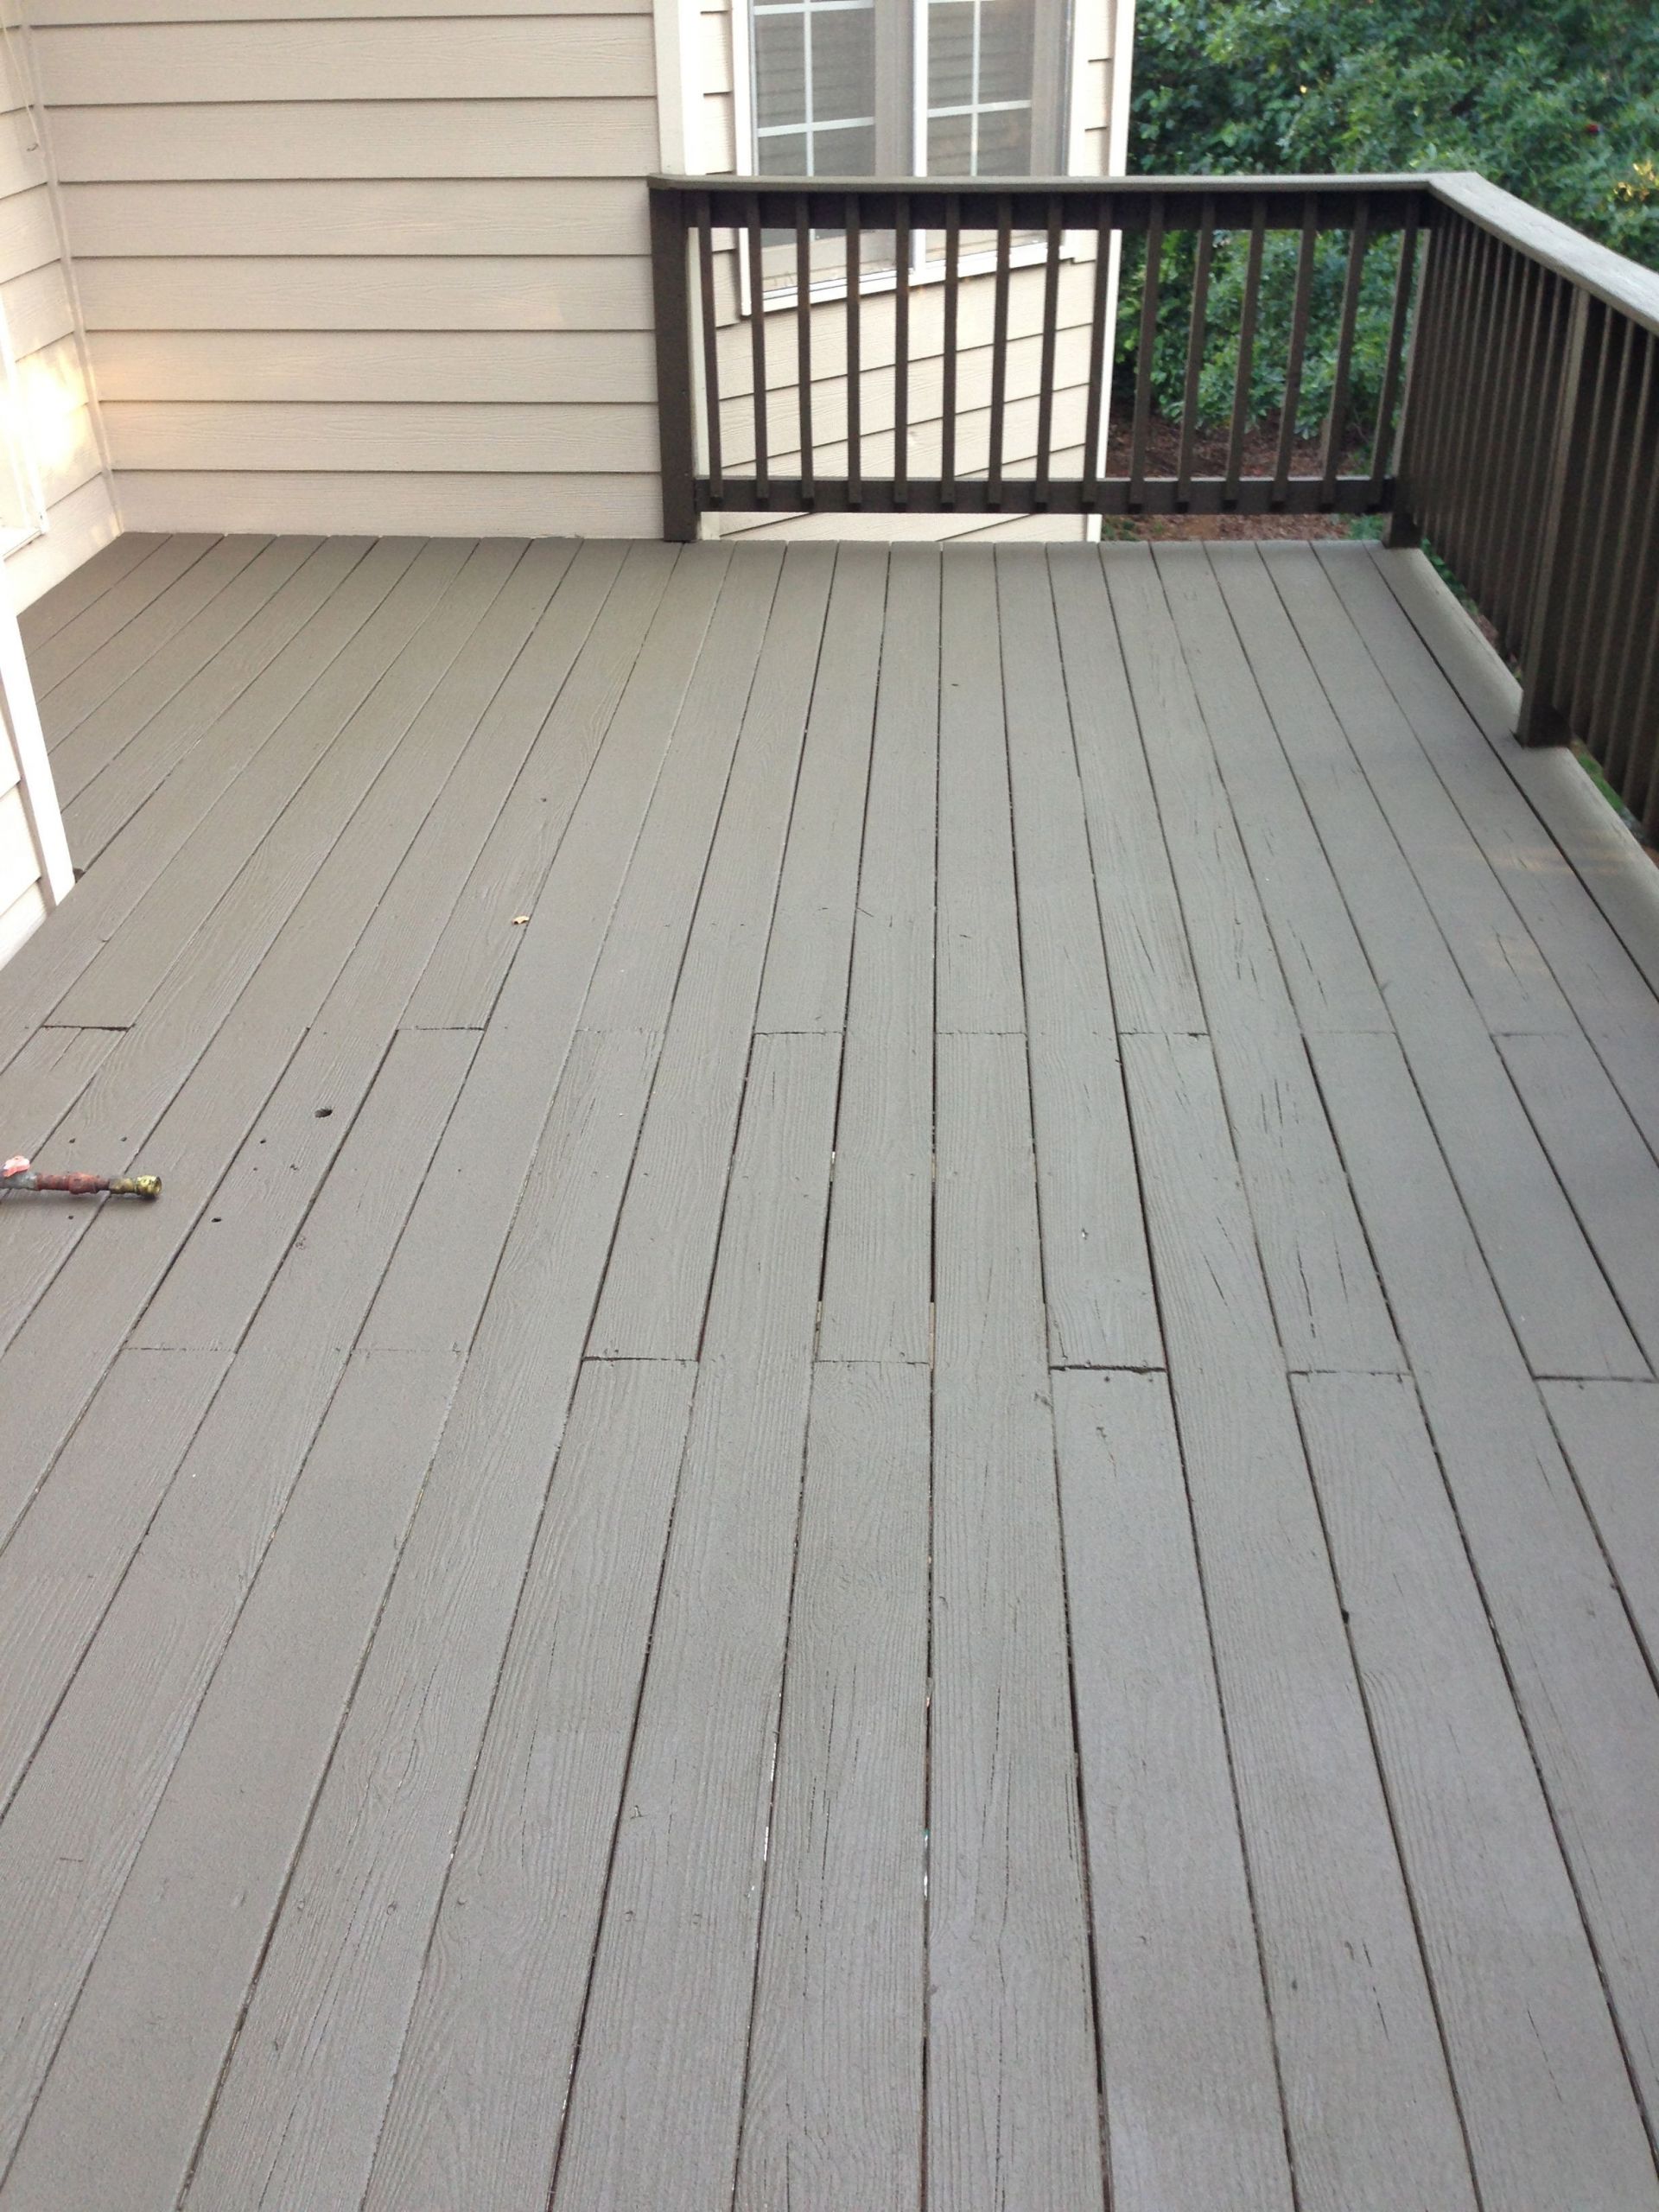 Sherwin Williams Deck Paint
 After photo Sherwin Williams Deck Revive fills cracks